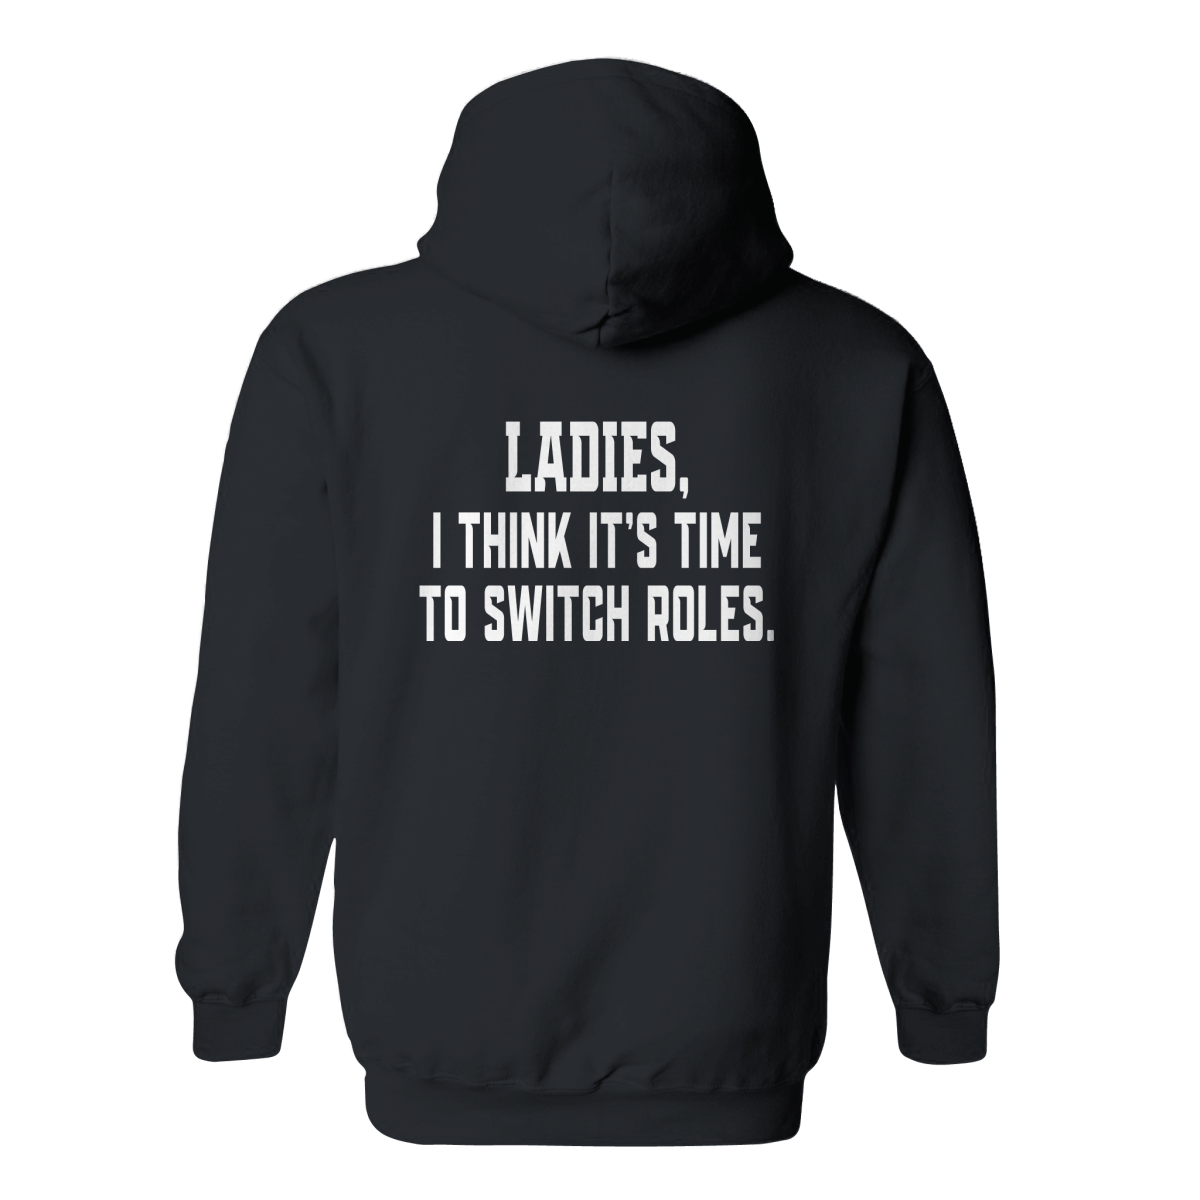 LSU Tigers Ain't Nobody Can Touch Me Shirt, hoodie, sweater, long